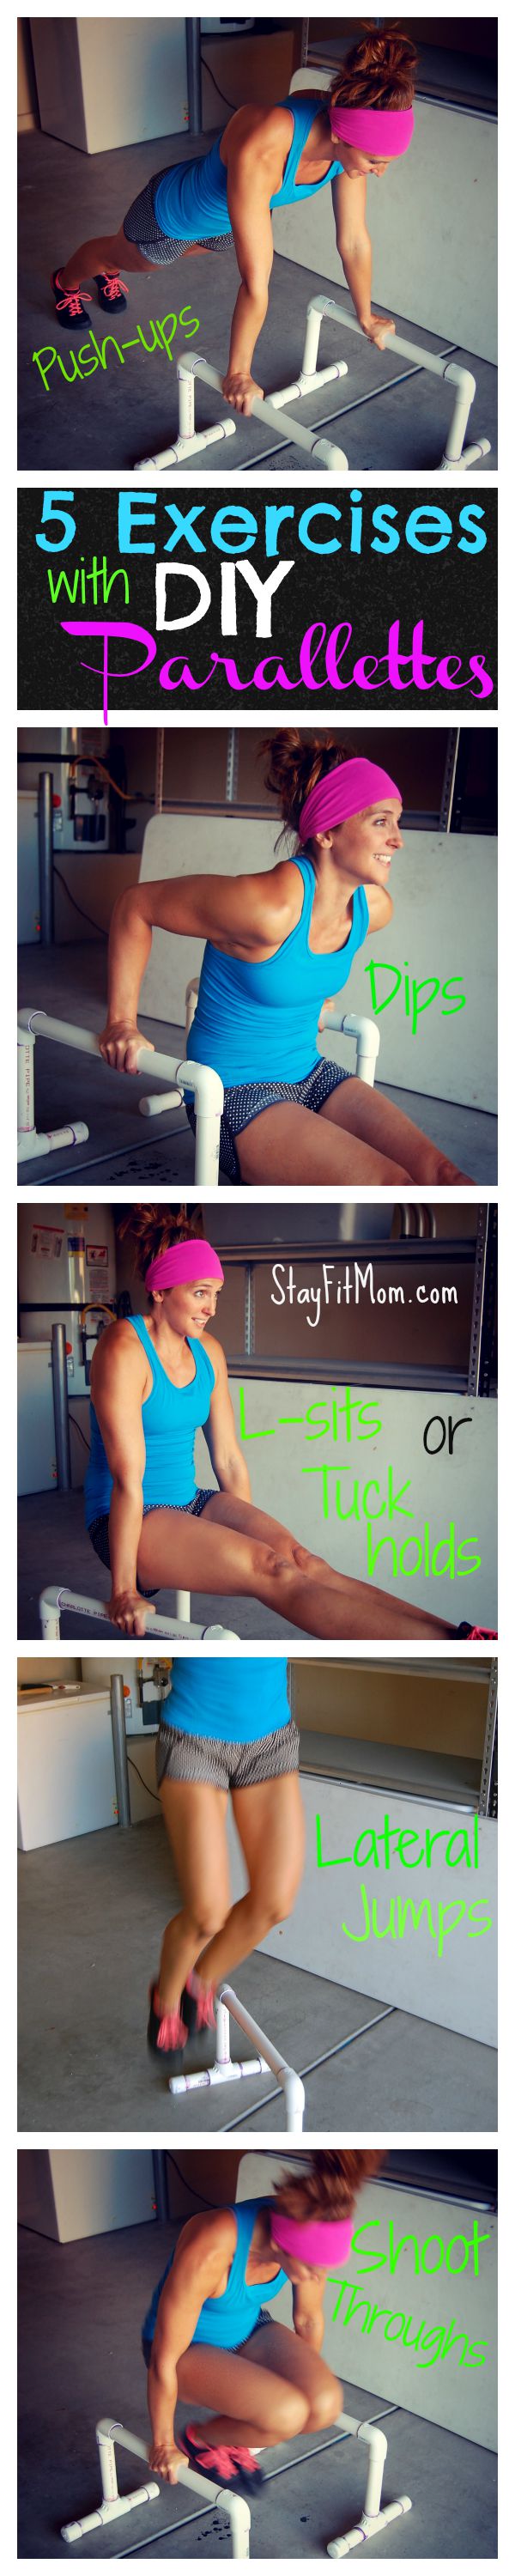 5 exercises using DIY parallettes!